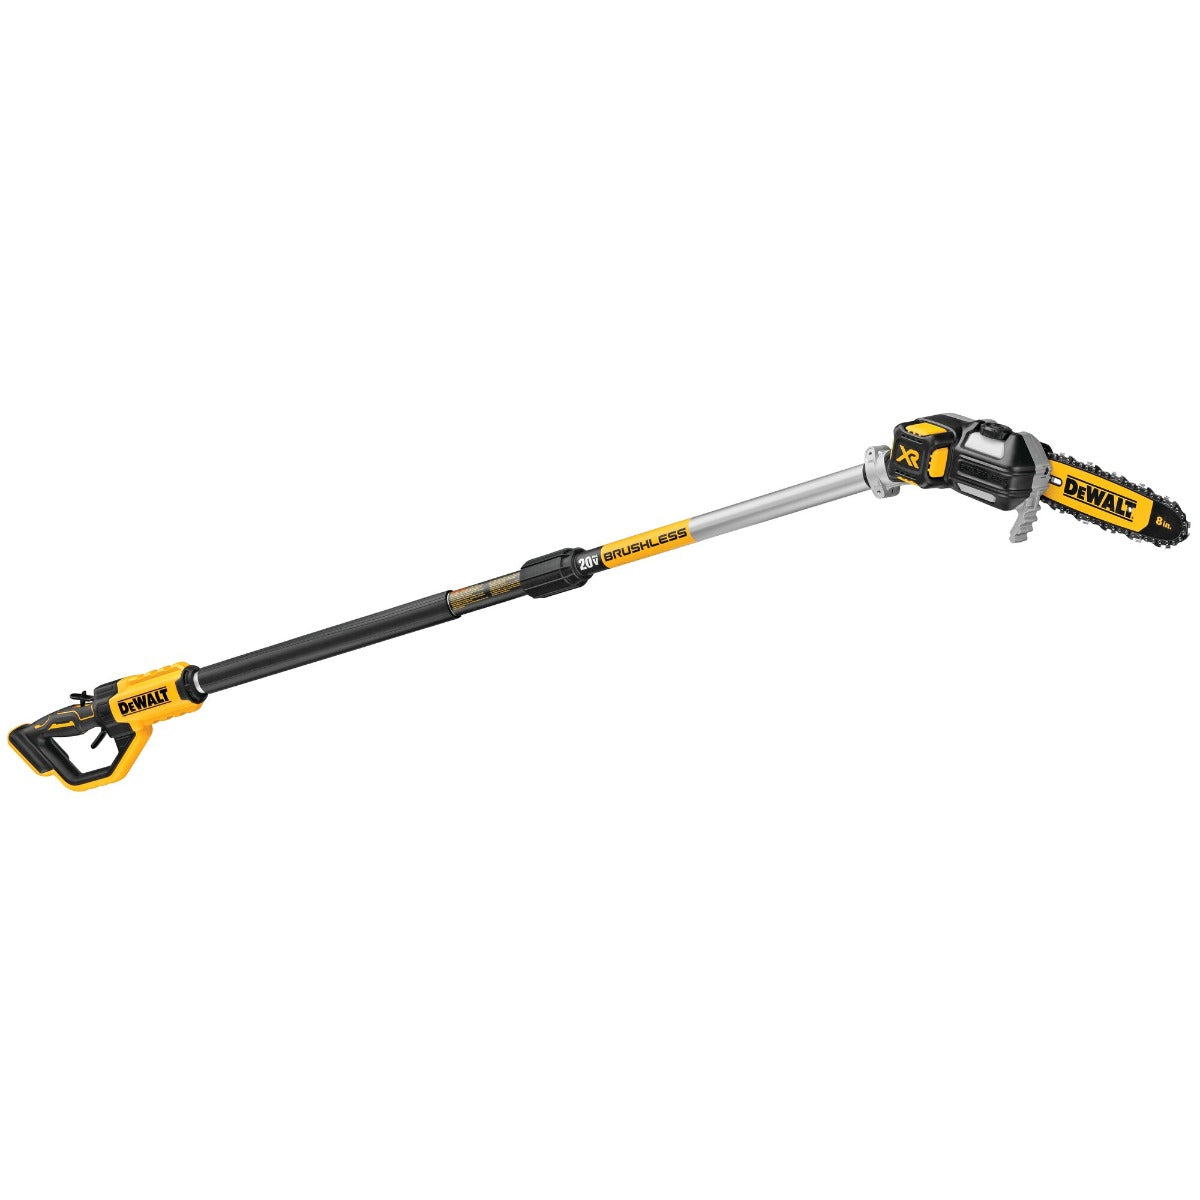 Dewalt DCPS620B 20V Max* Xr® Brushless Cordless Pole Saw (Tool Only)